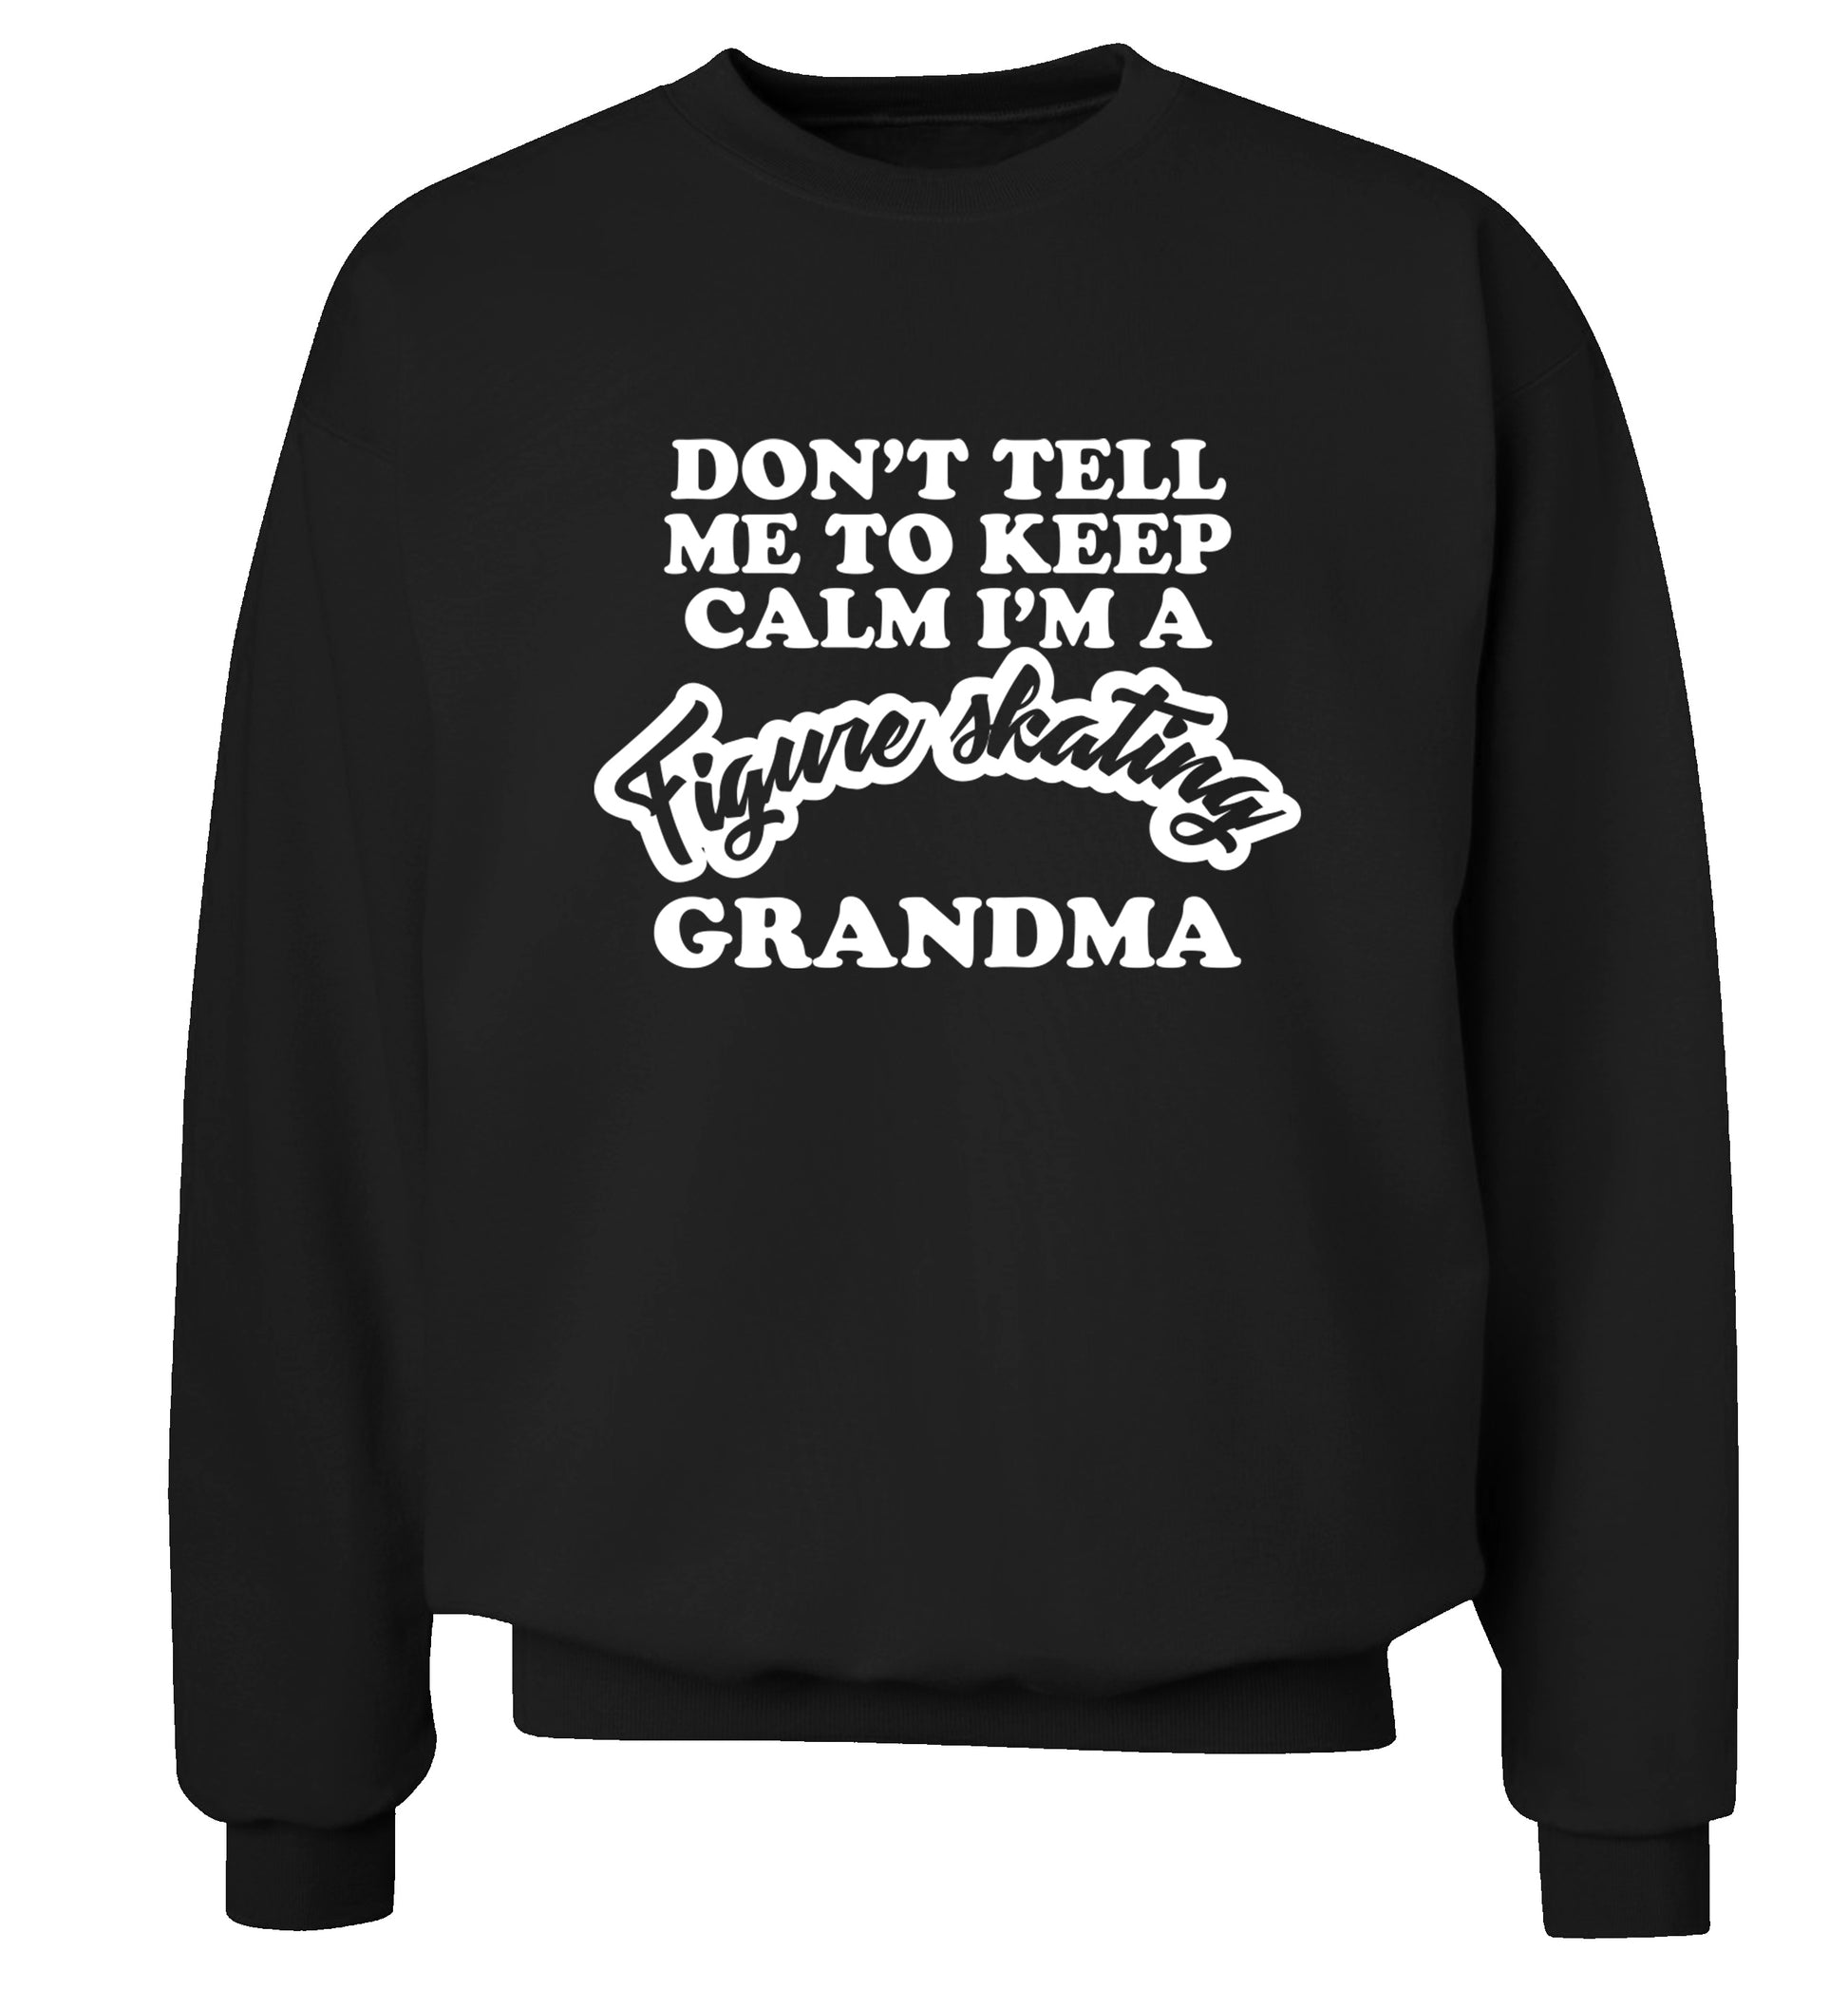 Don't tell me to keep calm I'm a figure skating grandma Adult's unisexblack Sweater 2XL